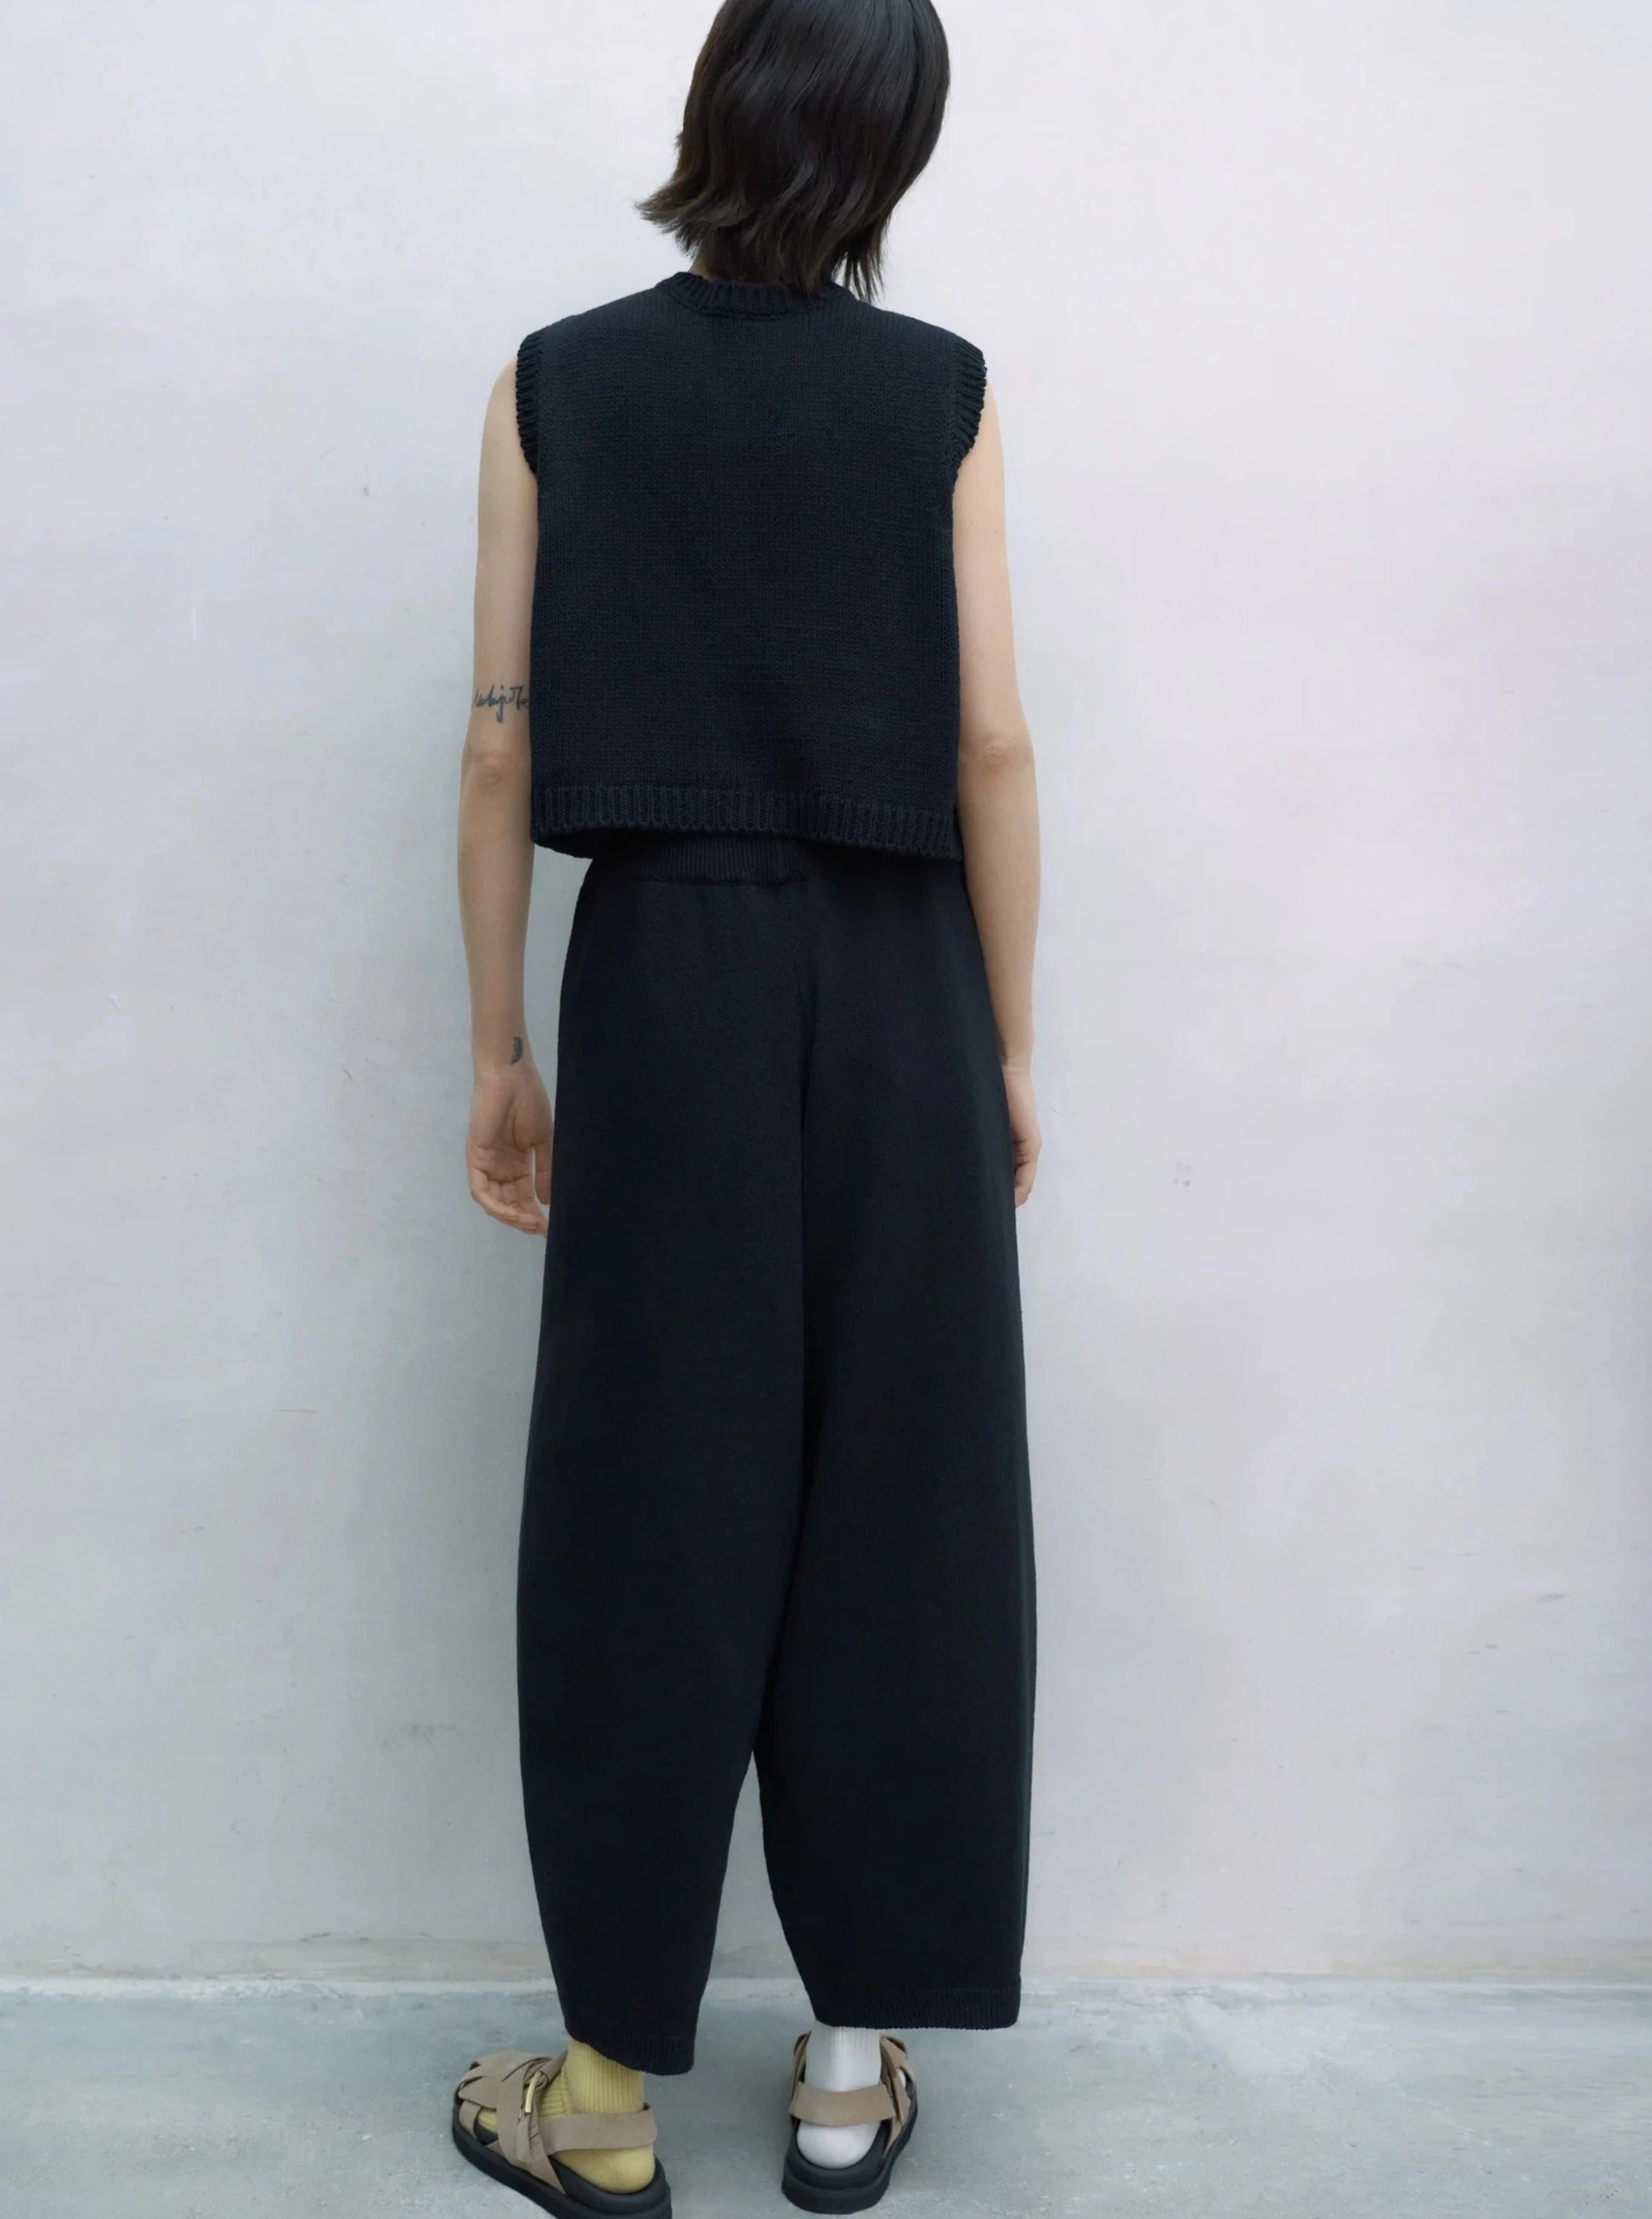 COTTON KNITTED PANTS | BLACK